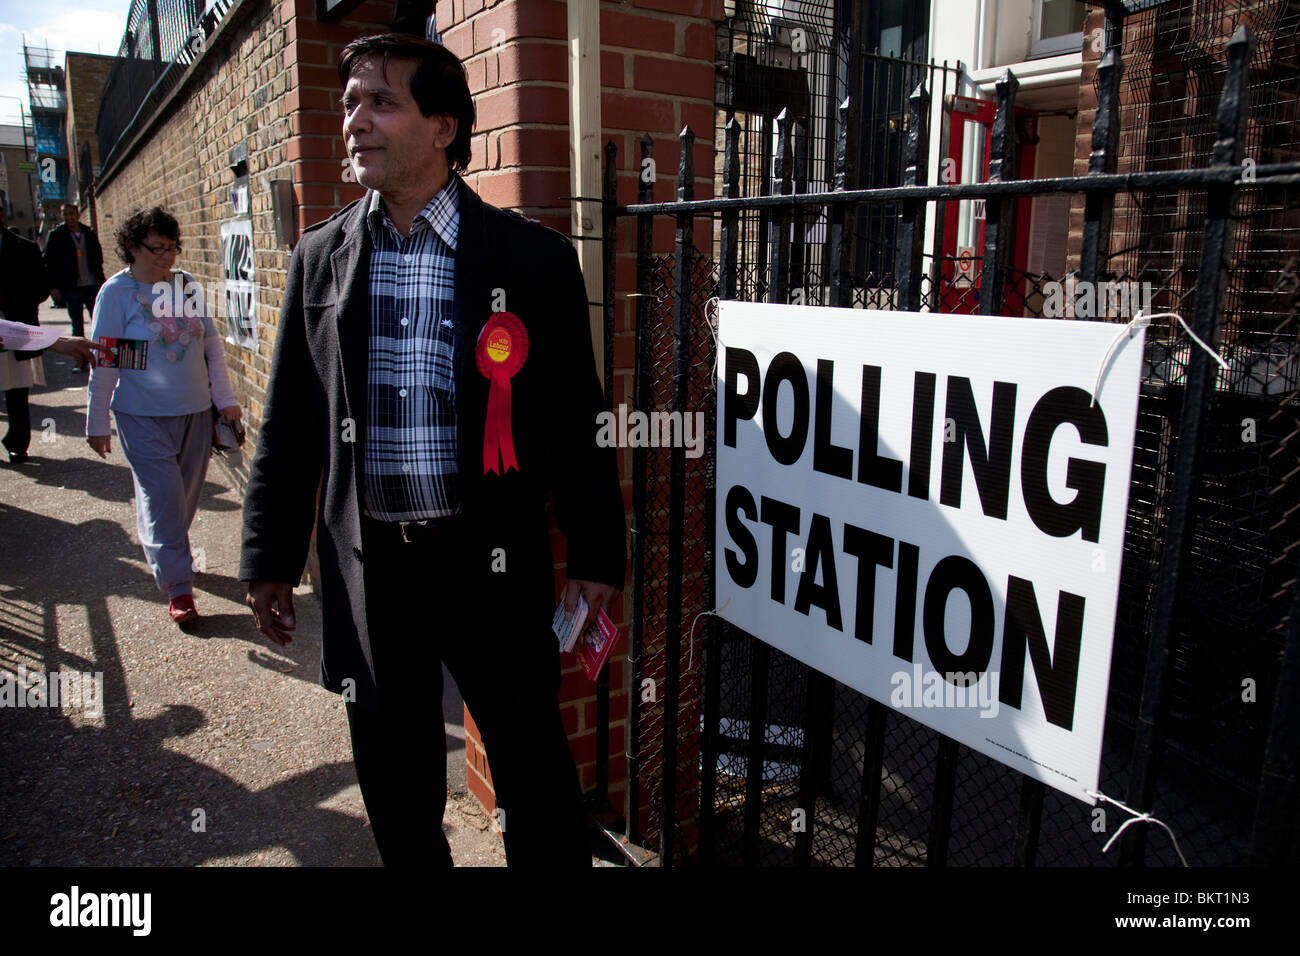 Predominantly Muslim voters, and supporters at a Polling Station in Whitechapel, in the East End of London. Stock Photo